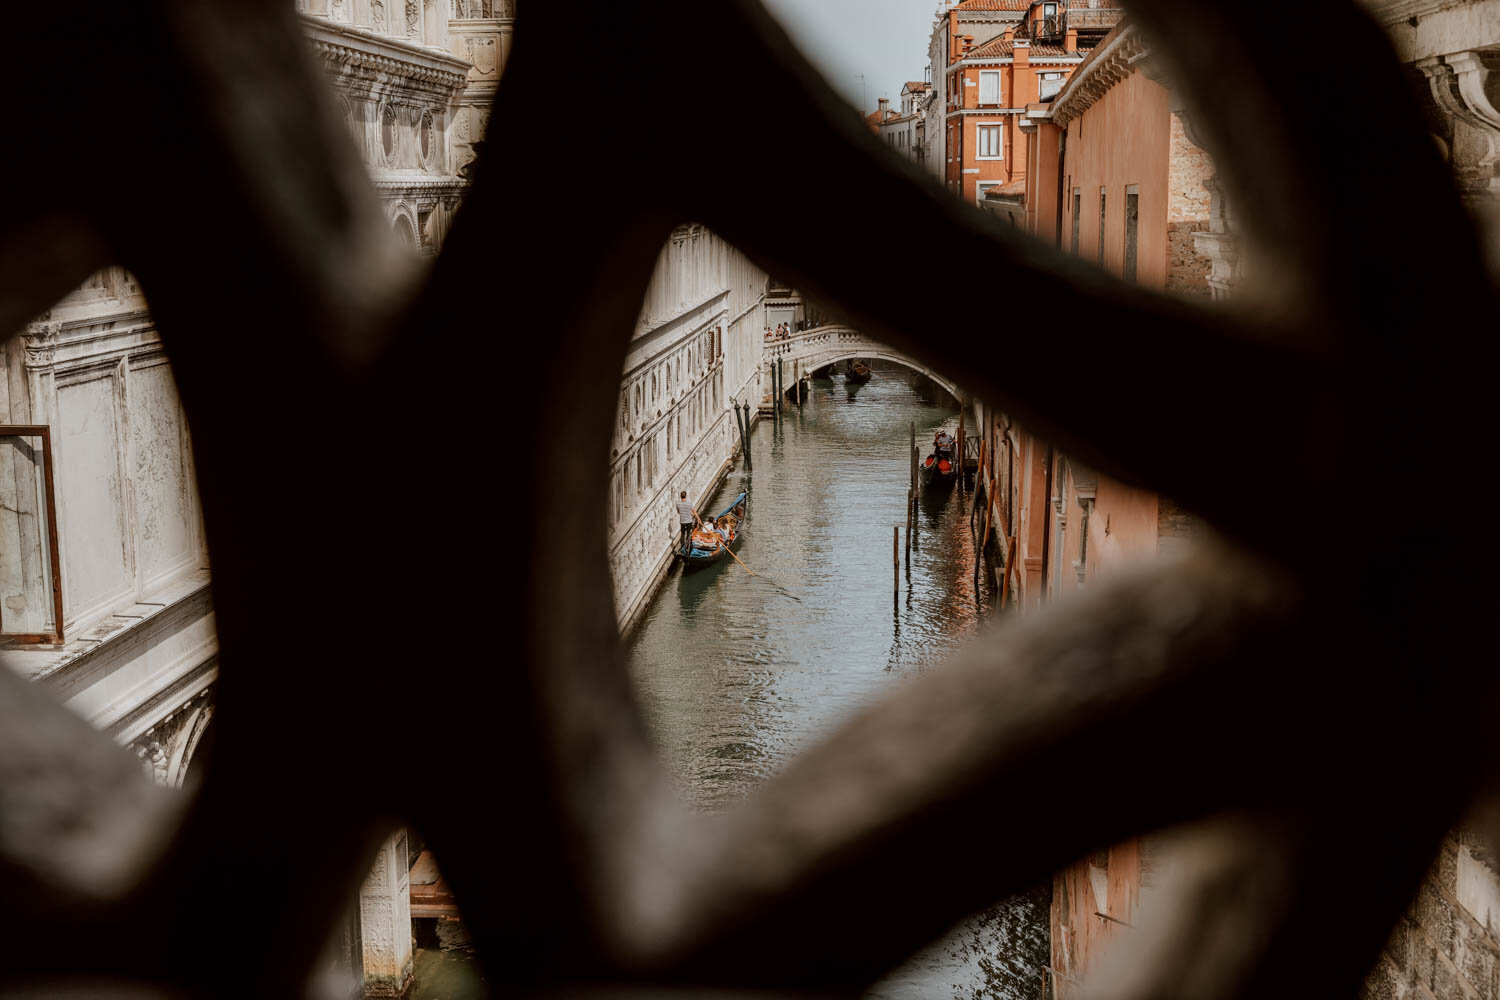 View from Bridges of Sighs, Venice